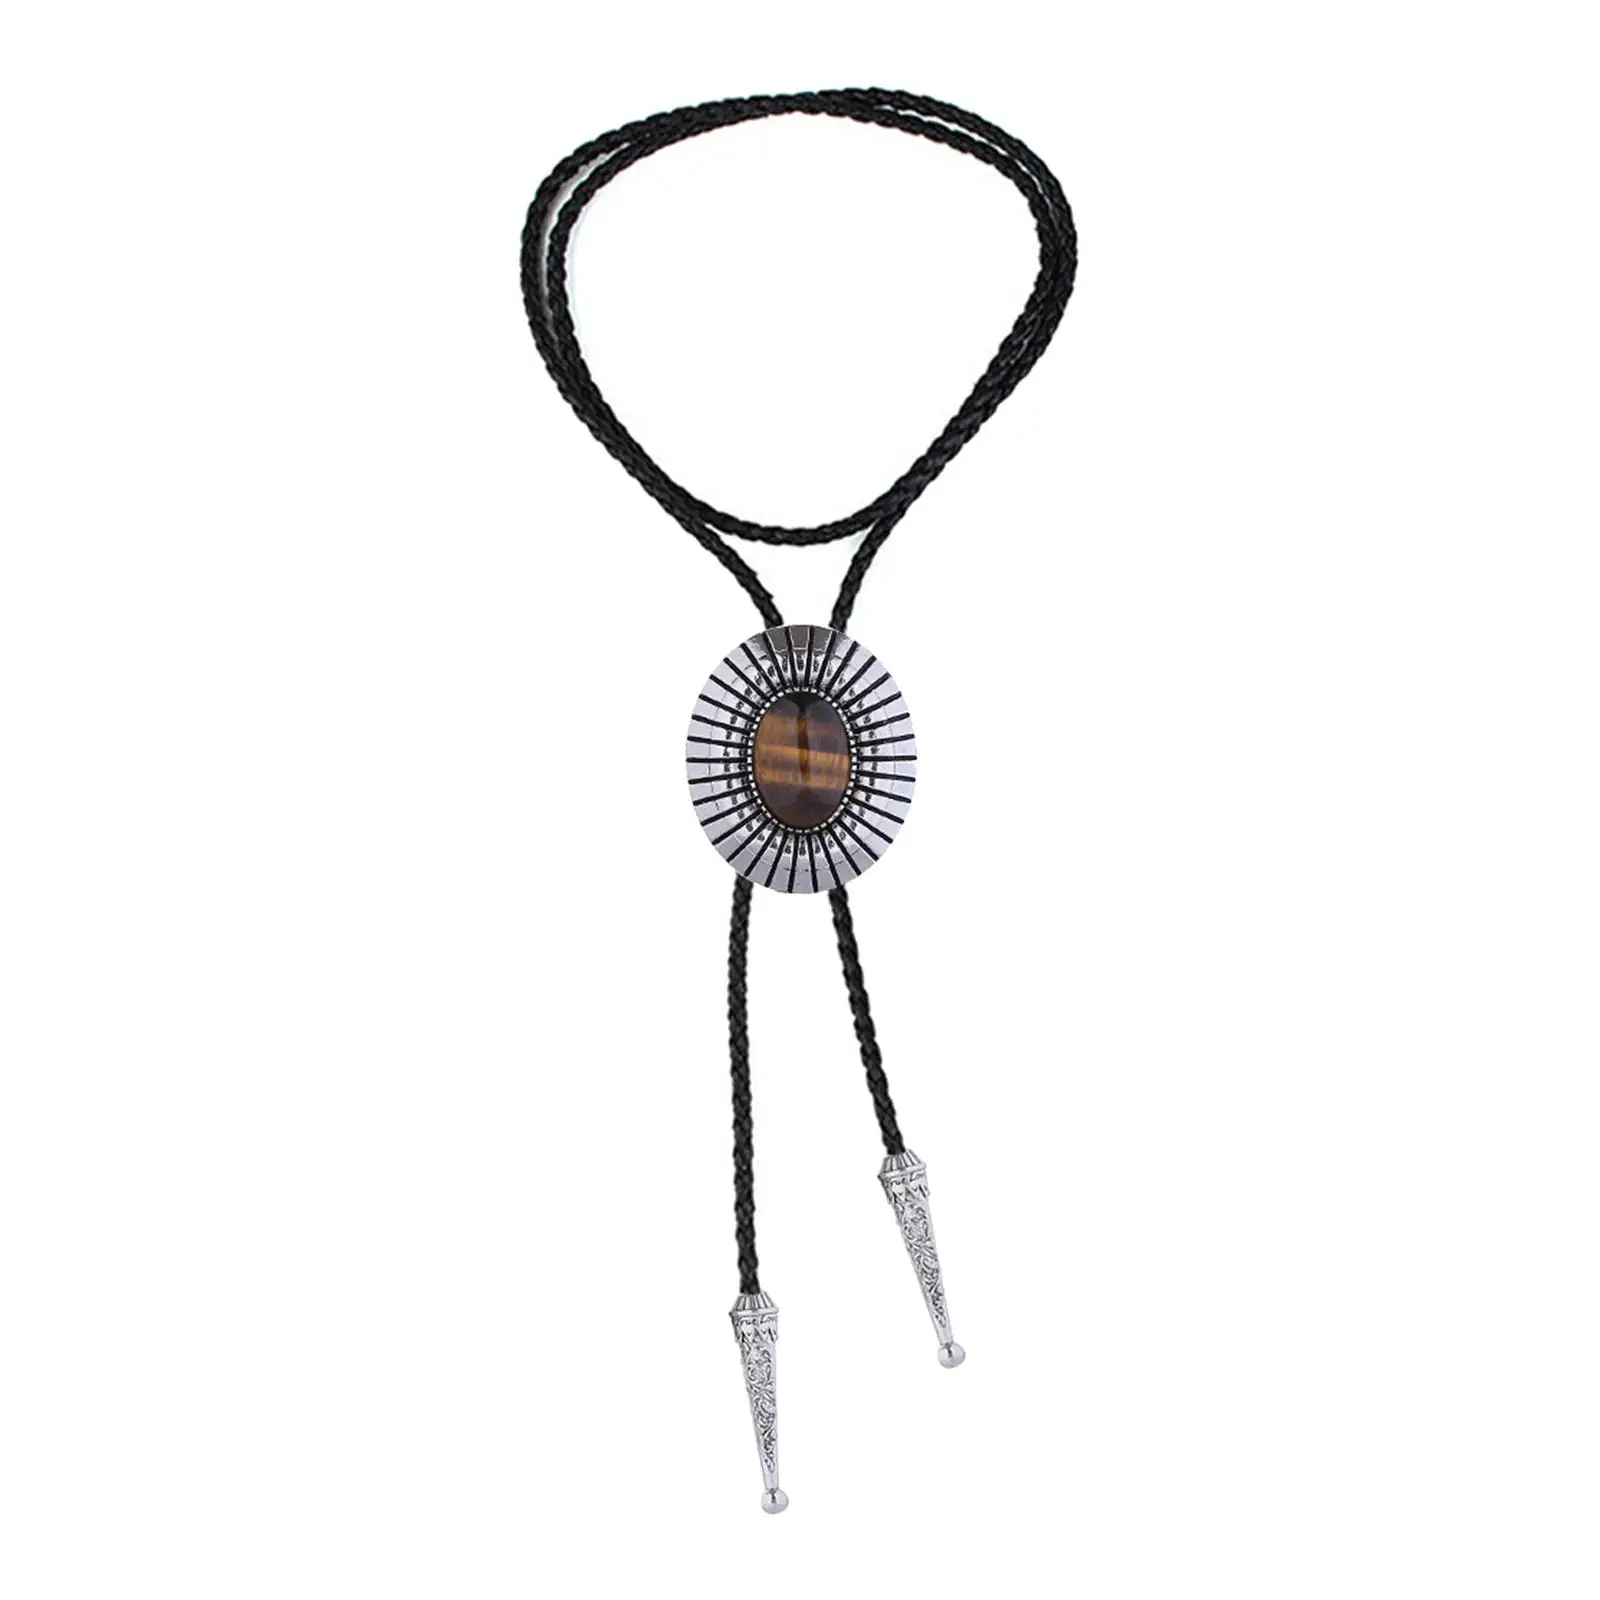 Bolo Tie Necktie Western Cowboy Retro PU Leather Costume Alloy Rodeo American Gift Accessories Oval Necklace for Party Men Women